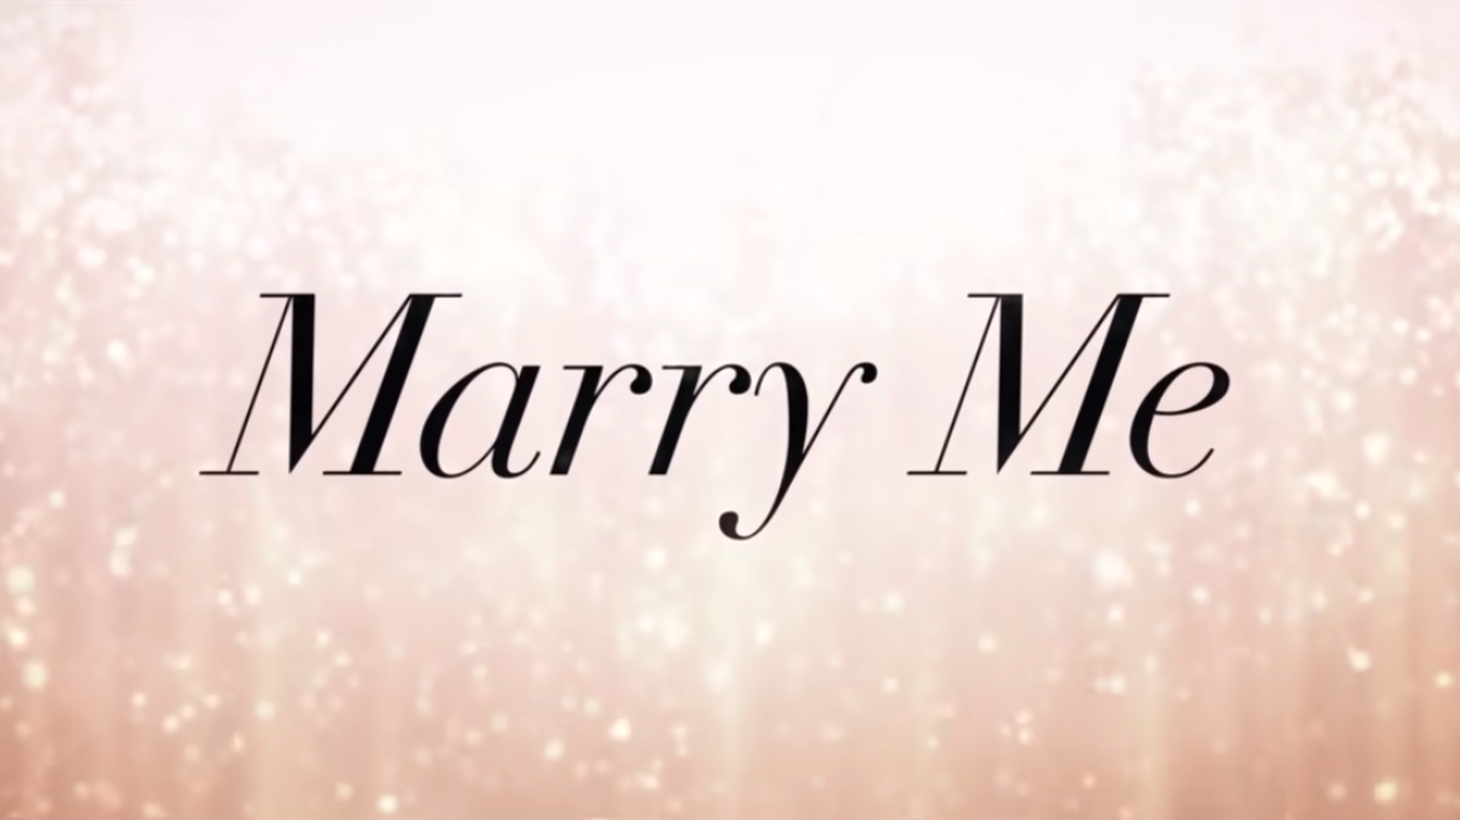 “Marry Me” stars Jennifer Lopez and Owen Wilson as two strangers who suddenly agree to tie the knot and then get to know each other.